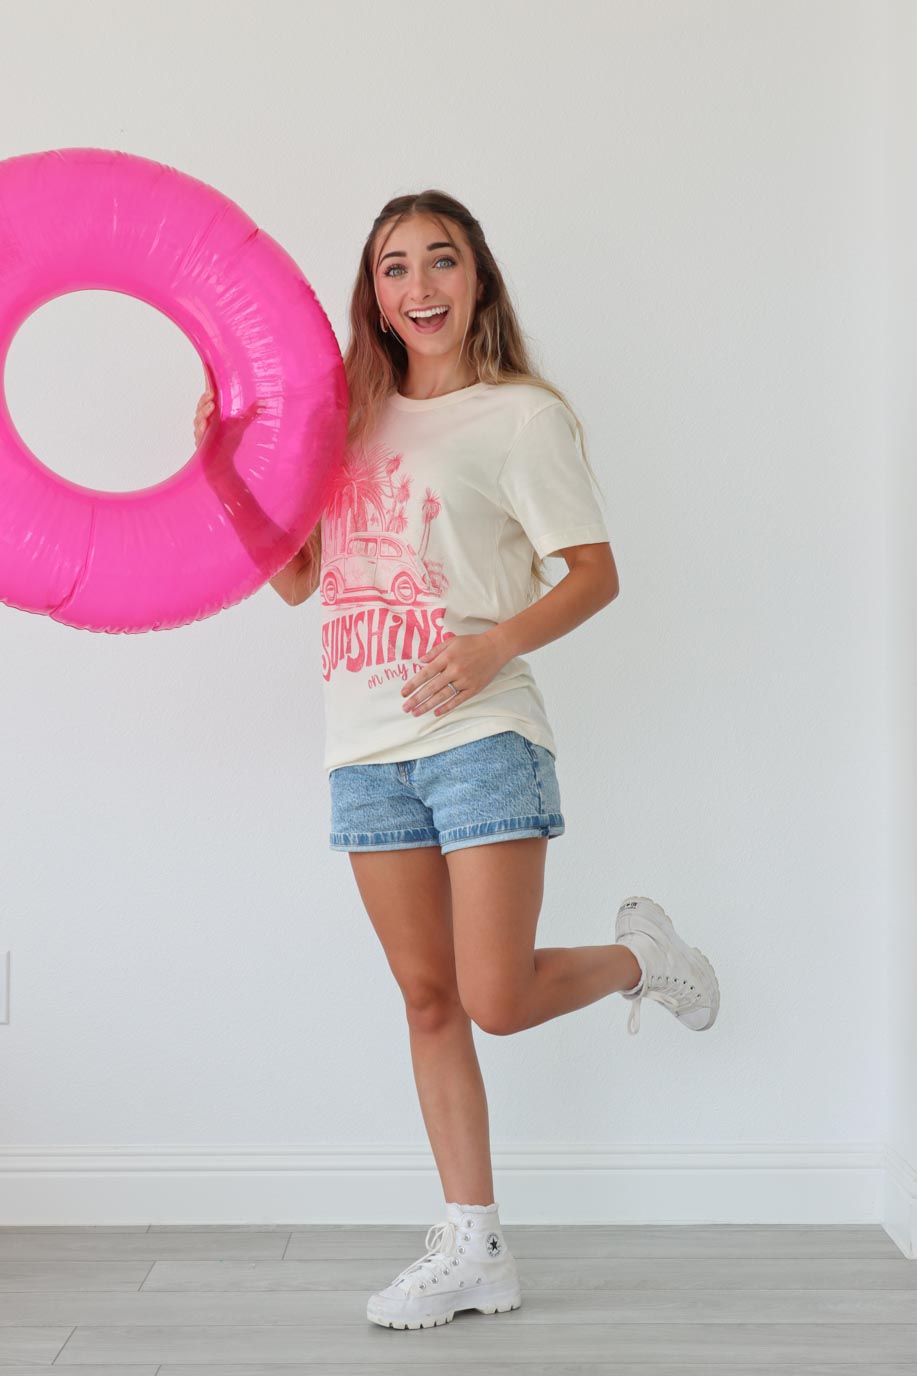 girl wearing cream t-shirt with pink "sunshine on my mind" graphic